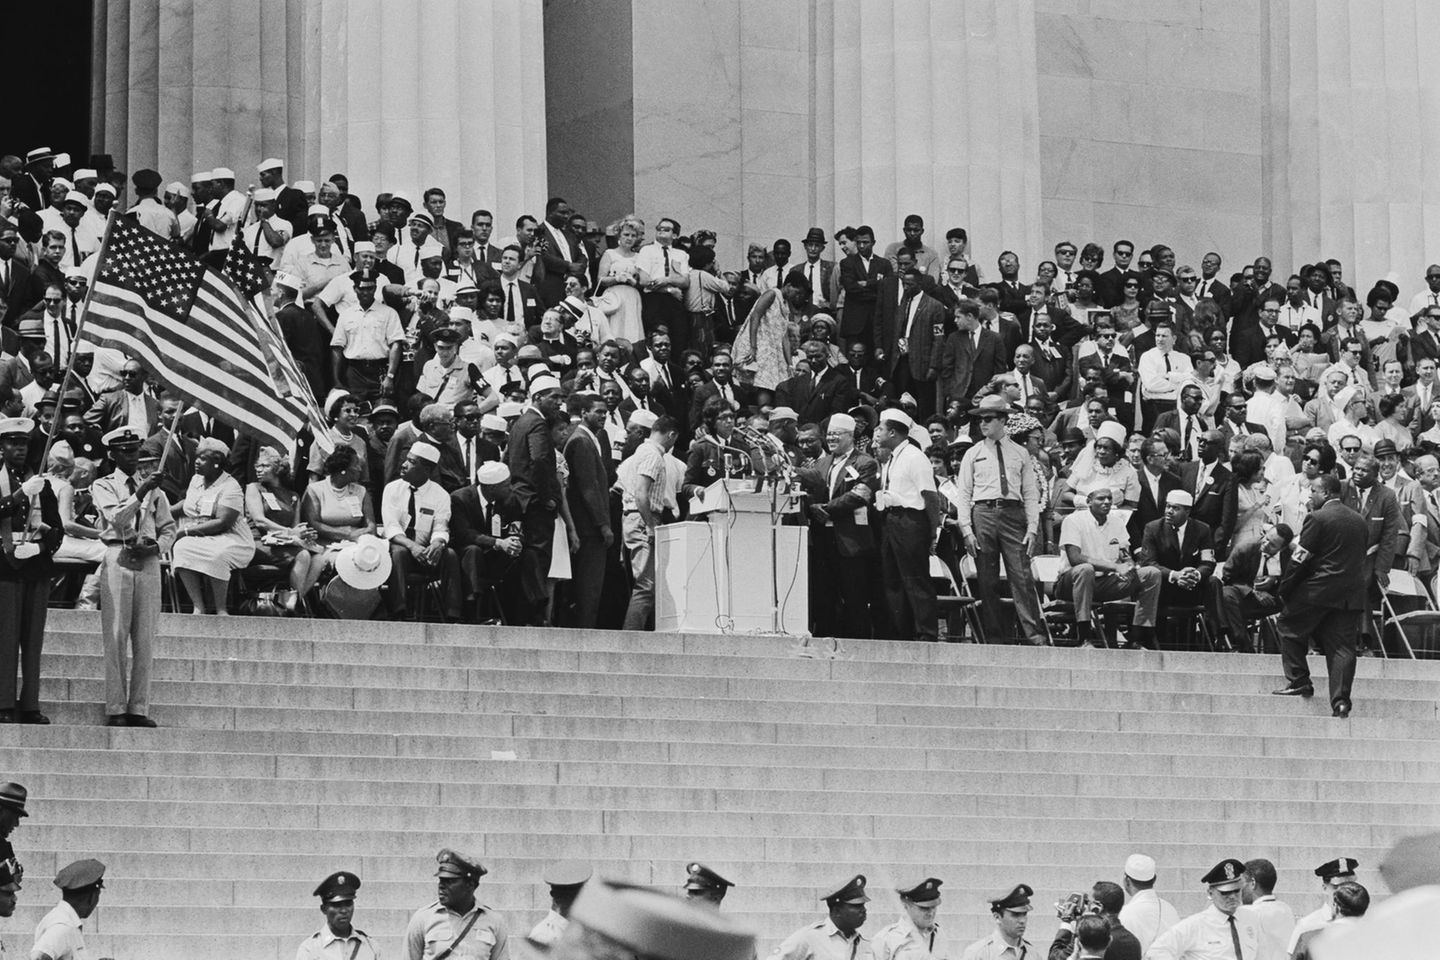 American-born French entertainer and civil rights activist Josephine Baker (1906 - 1975) speaking at the March on Washington for Jobs and Freedom, Washington DC, US, 28th August 1963. (Photo by Keystone/Hulton Archive/Getty Images)